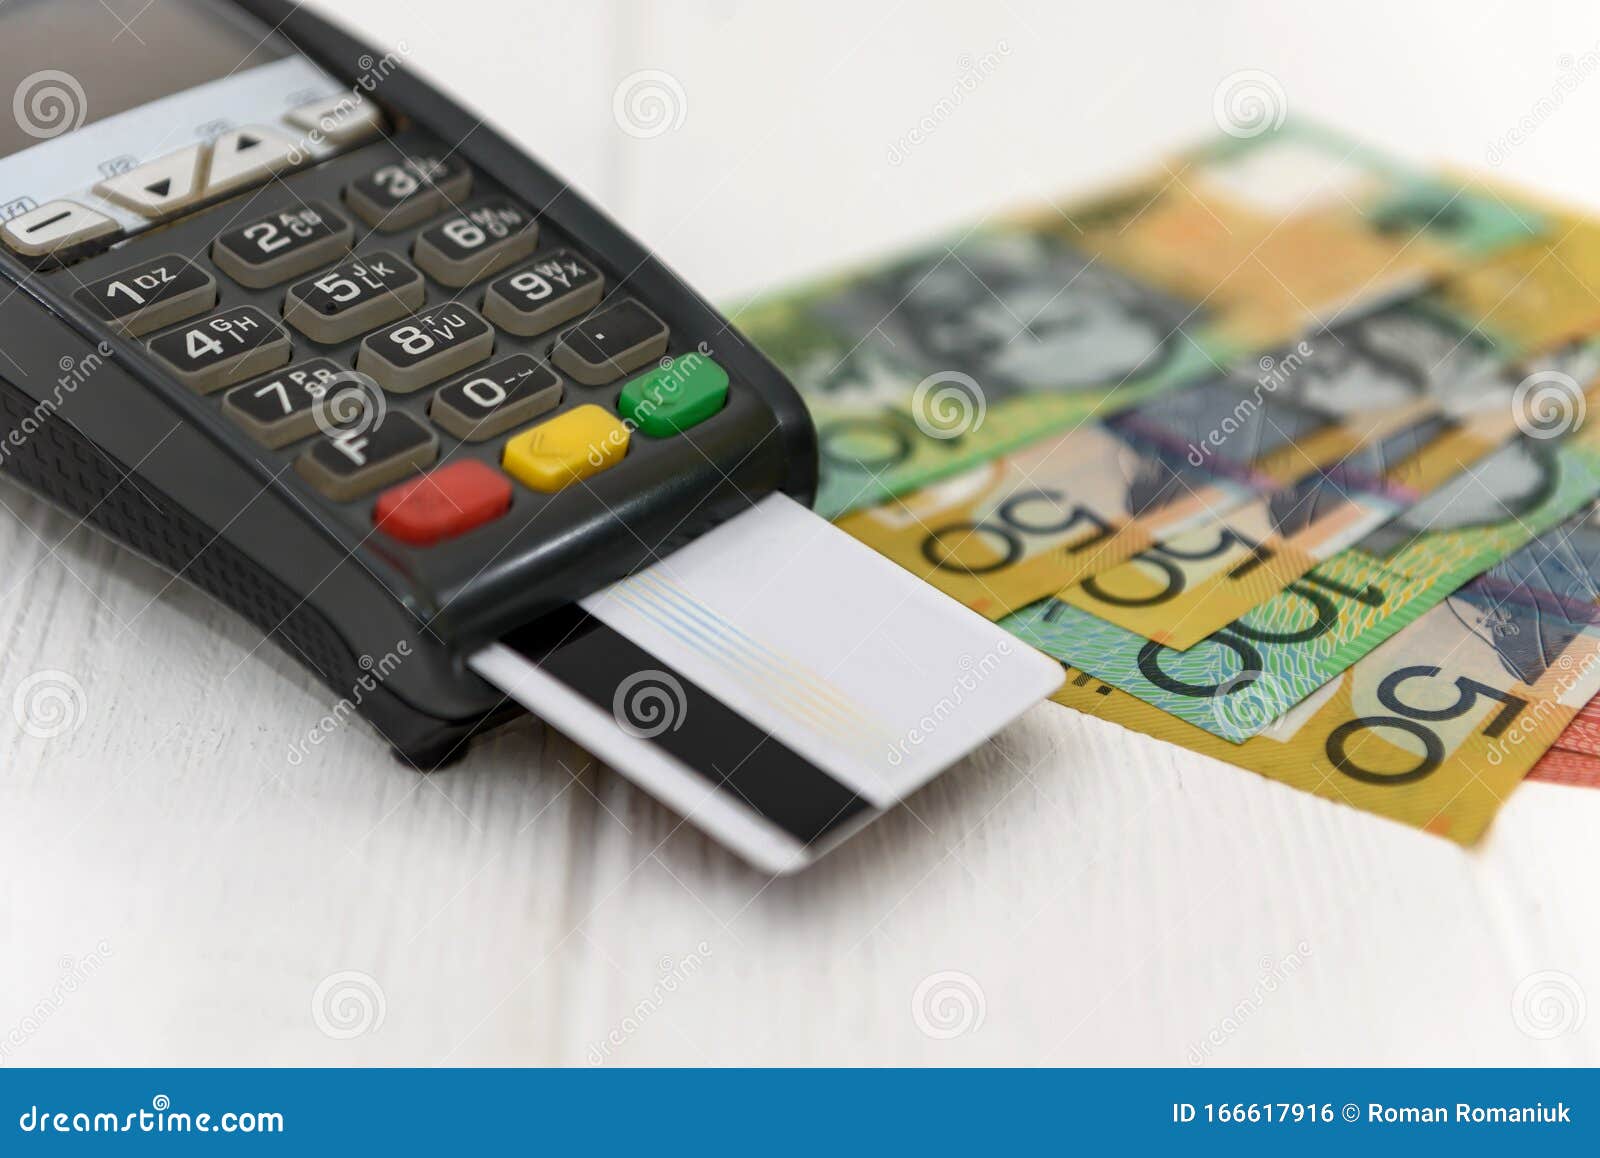 australian-dollar-banknotes-with-terminal-and-credit-card-stock-photo